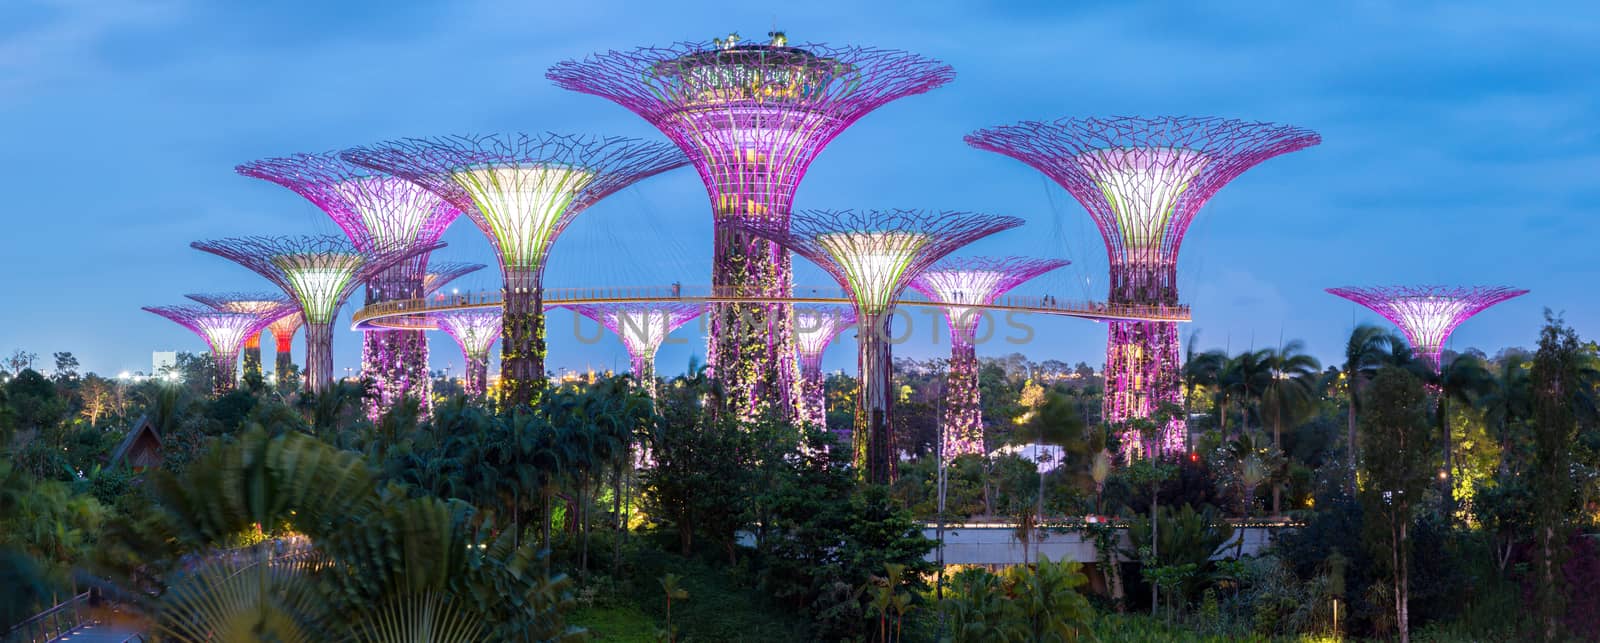 Gardens by the Bay Panorama by vichie81